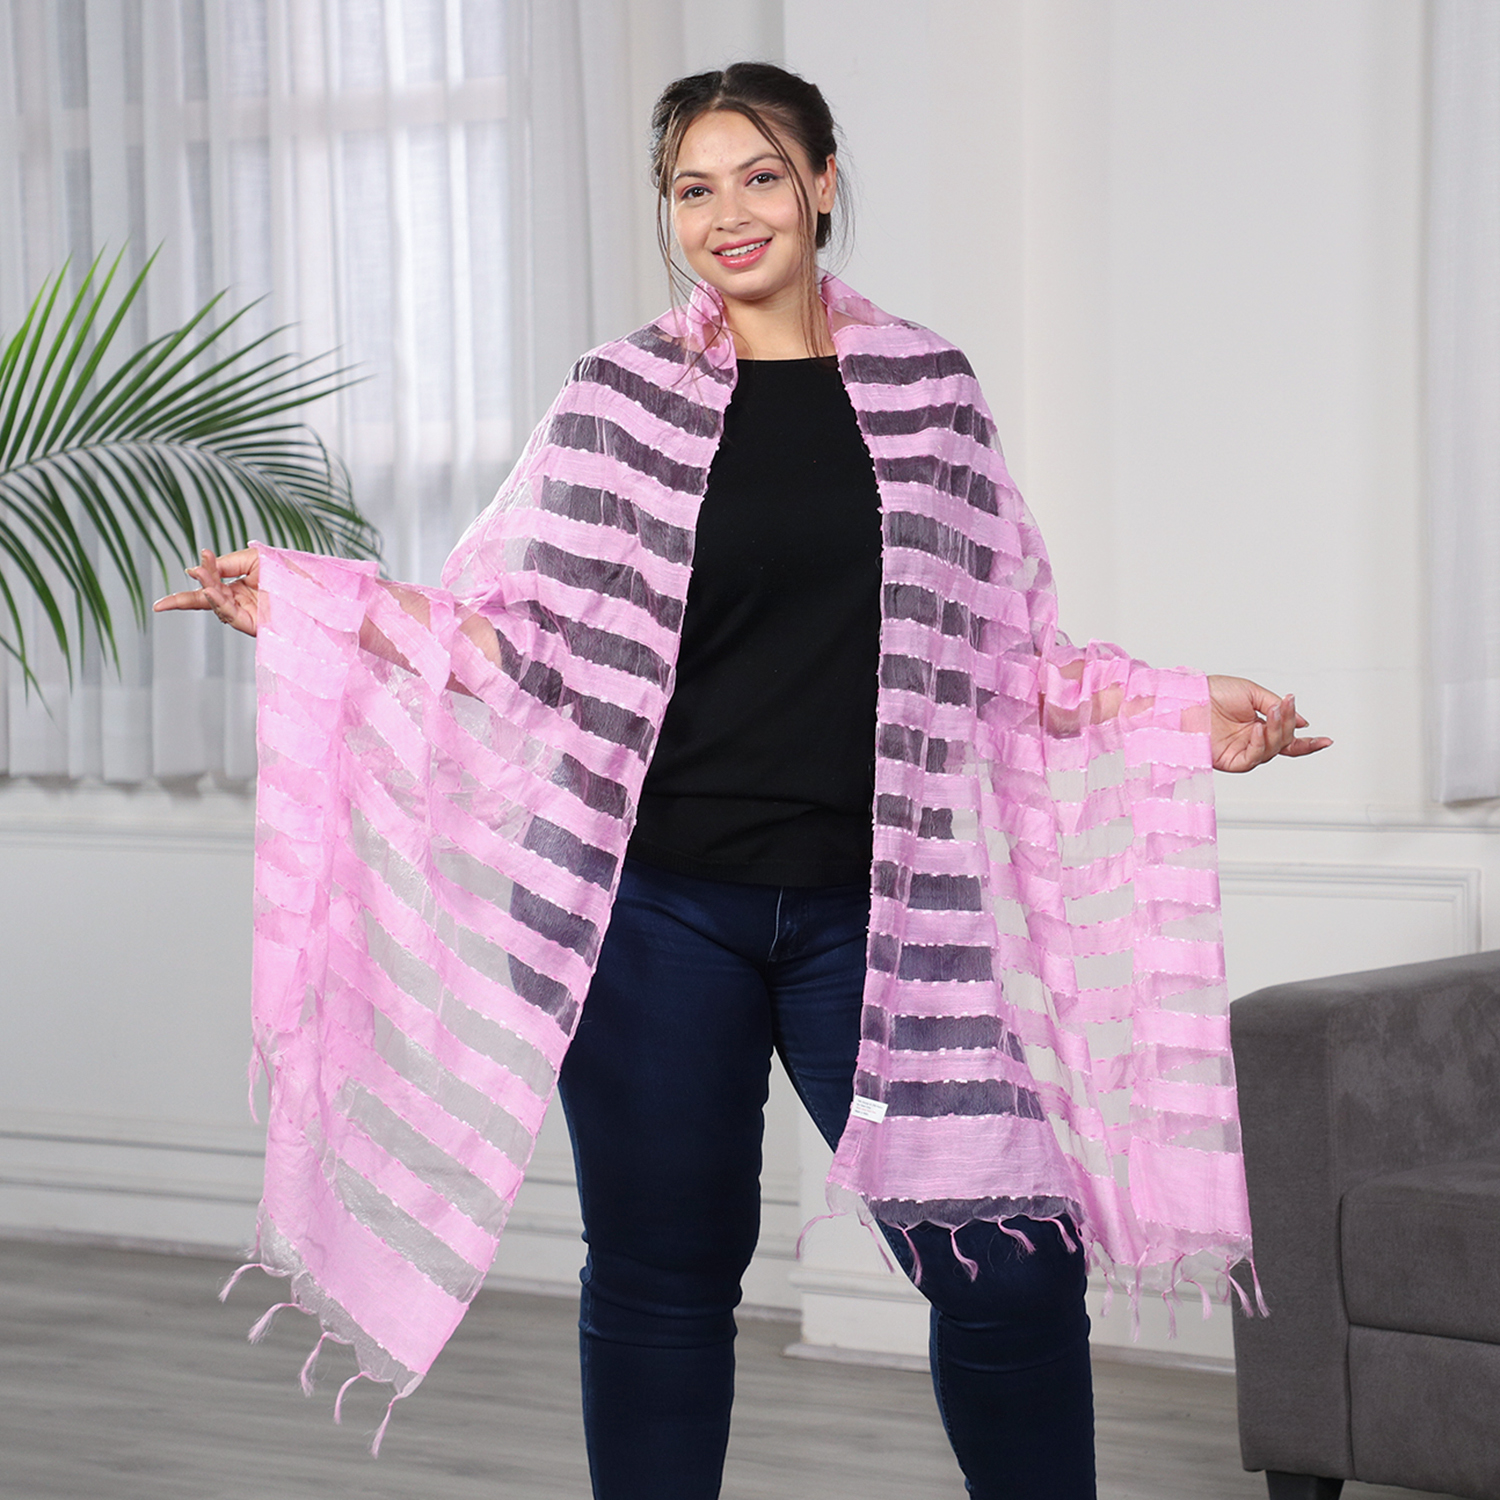 JOVIE - New Season Handmade Scarf with Fringes in Light Pink (Size 76x235cm)